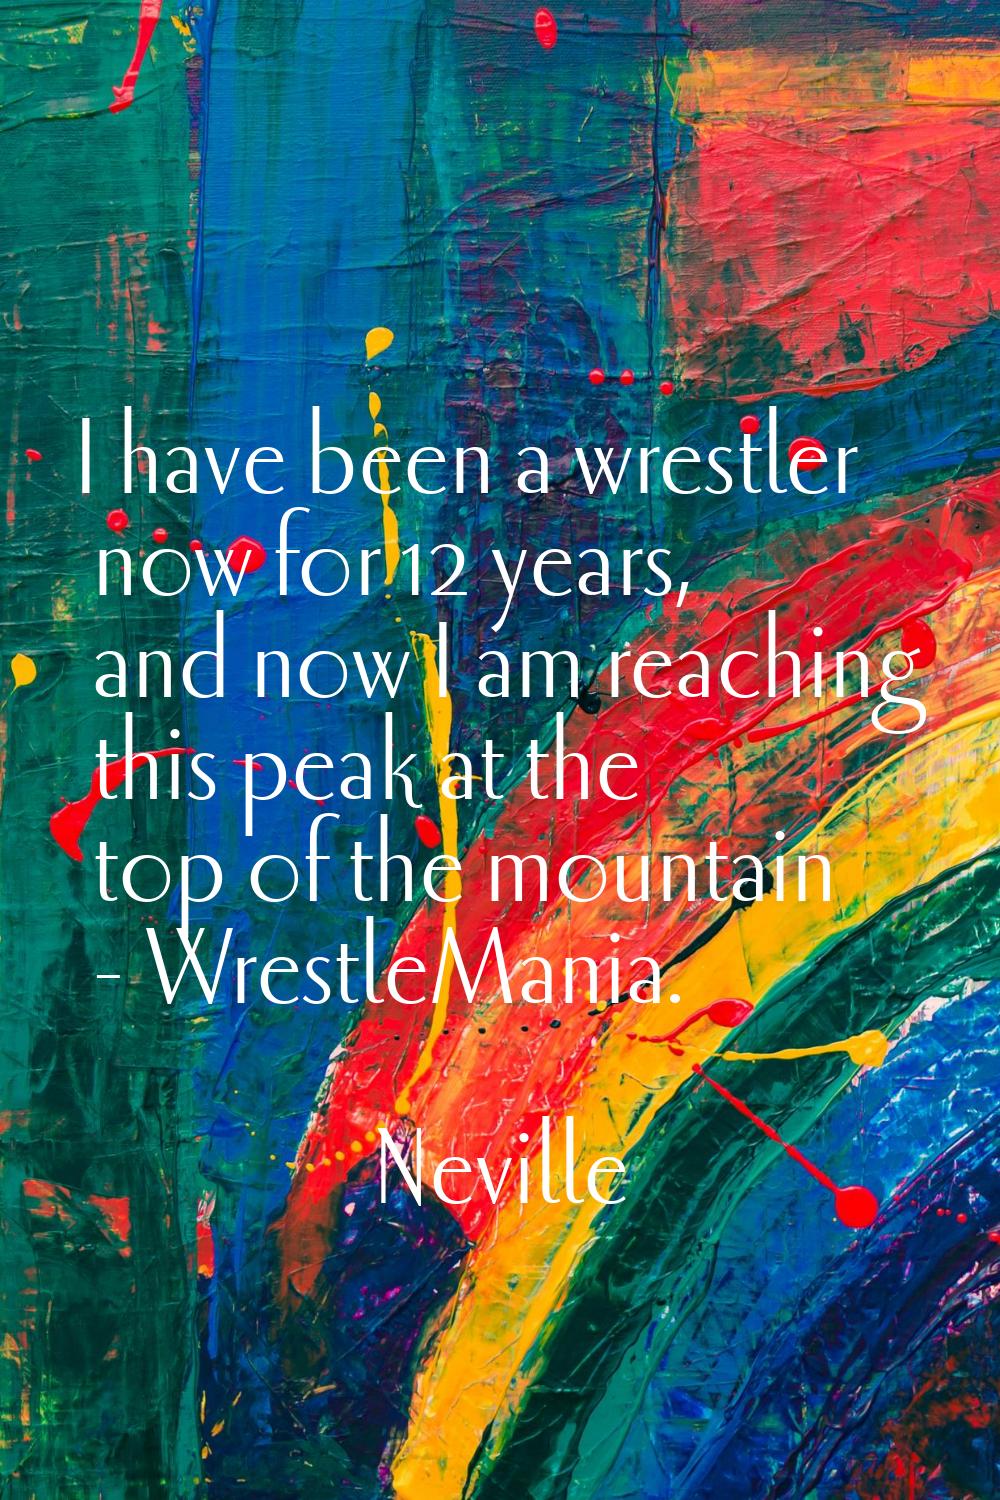 I have been a wrestler now for 12 years, and now I am reaching this peak at the top of the mountain